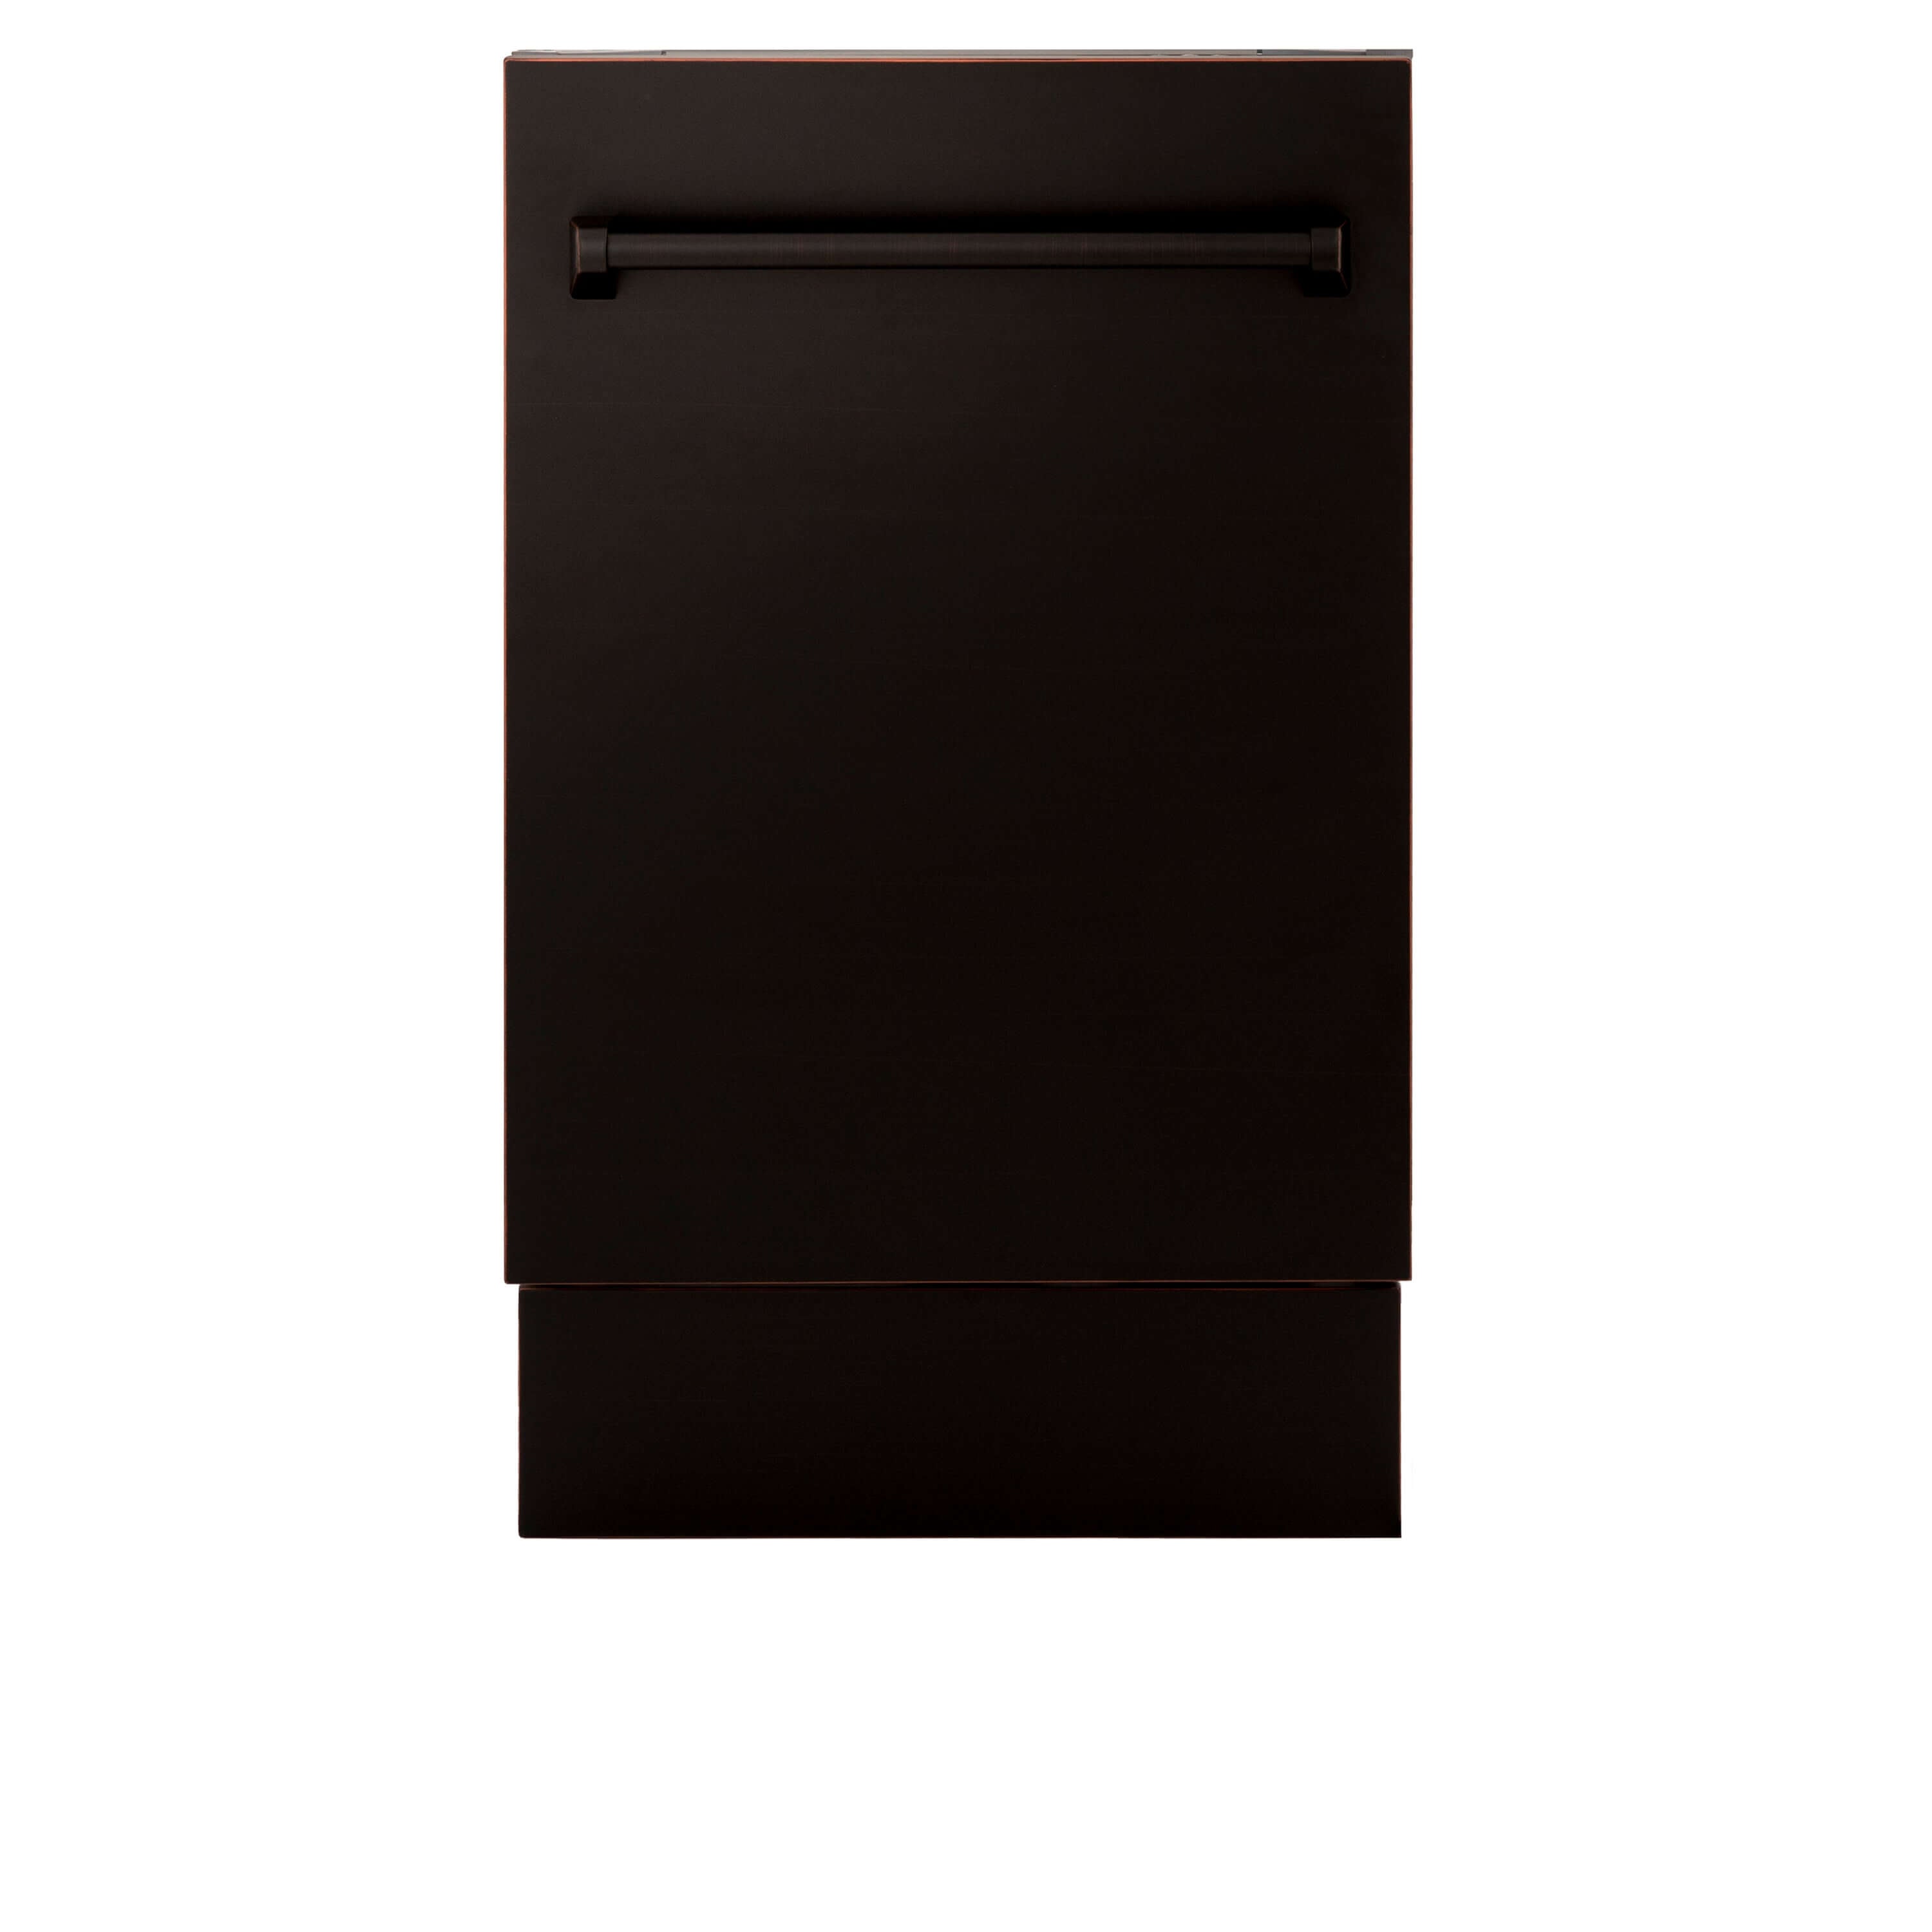 ZLINE 18 in. Tallac Series 3rd Rack Top Control Built-In Dishwasher in Oil Rubbed Bronze with Stainless Steel Tub, 51dBa (DWV-ORB-18)